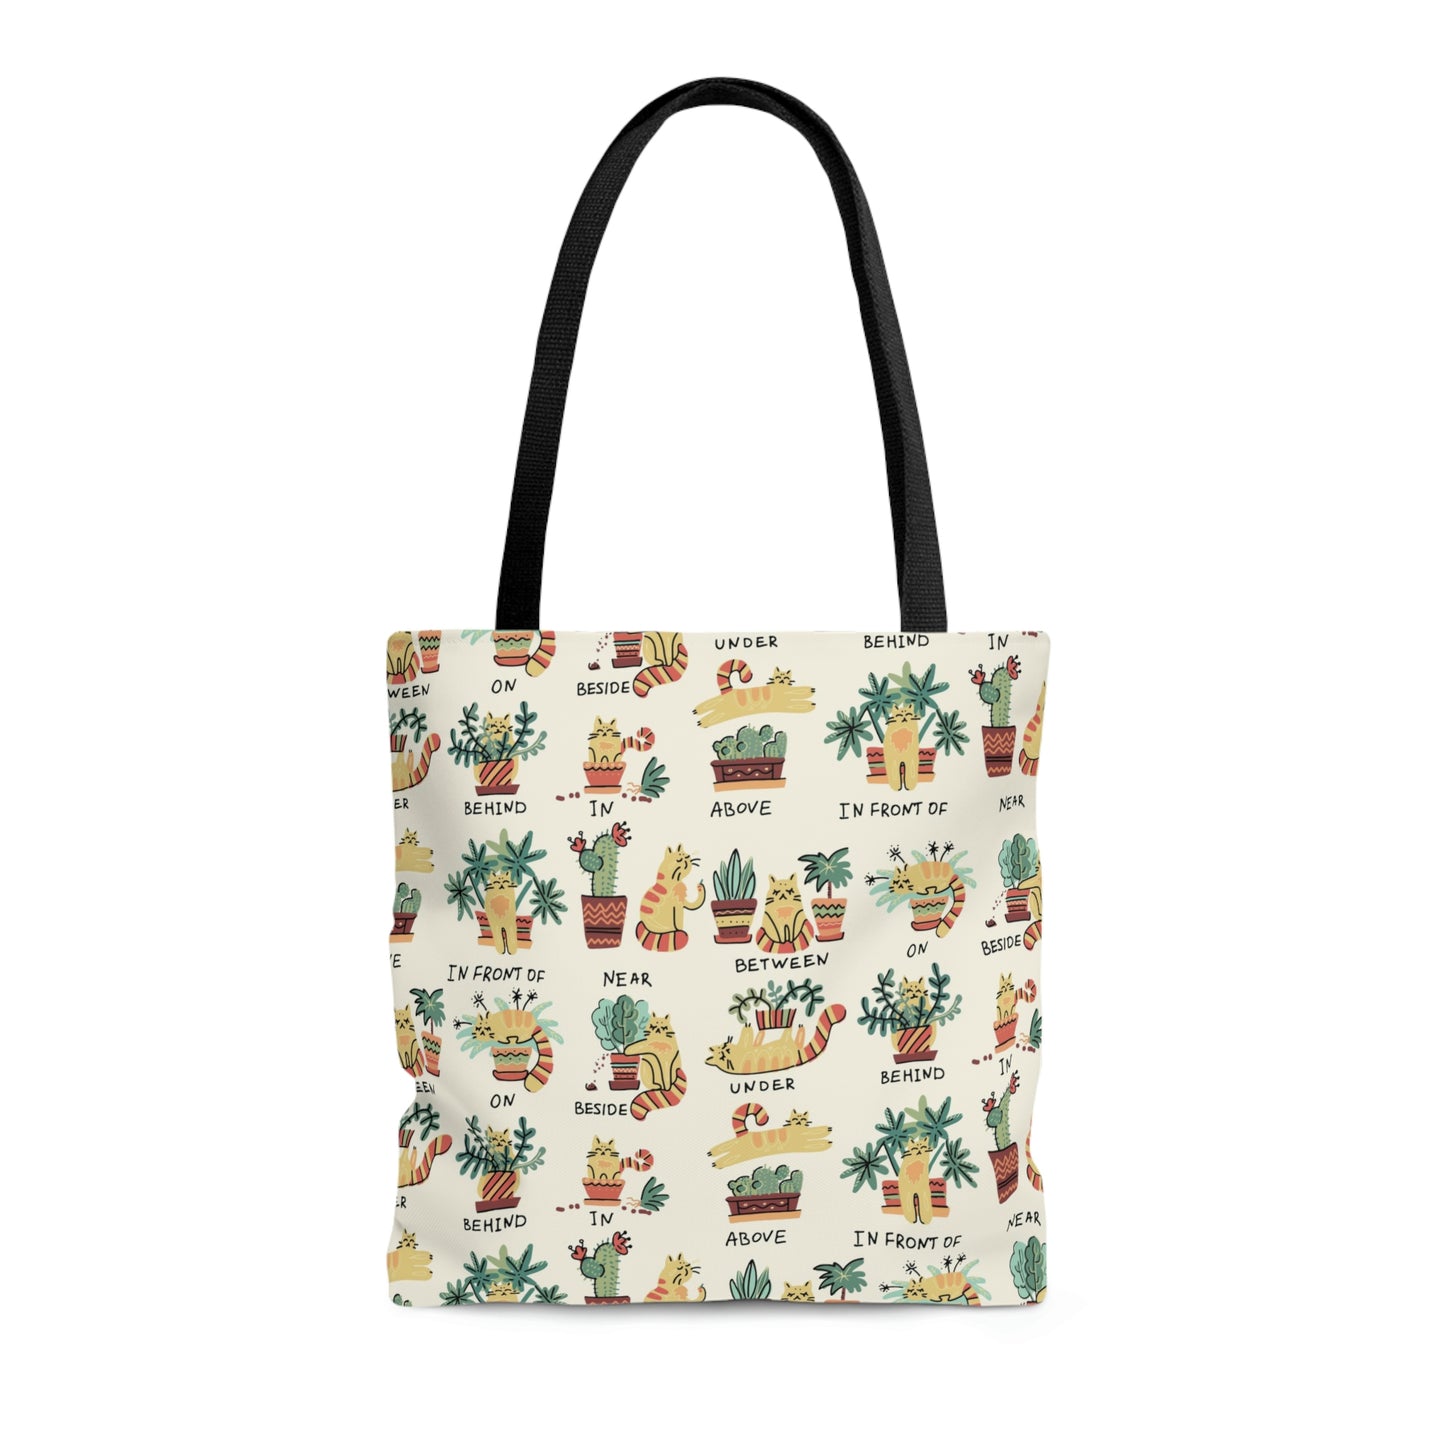 Cat Tote Bag for cat lovers. Funny cats and plants bag for plant lady or cat lady. Funny birthday gift for cat mama. Potted plants and cat